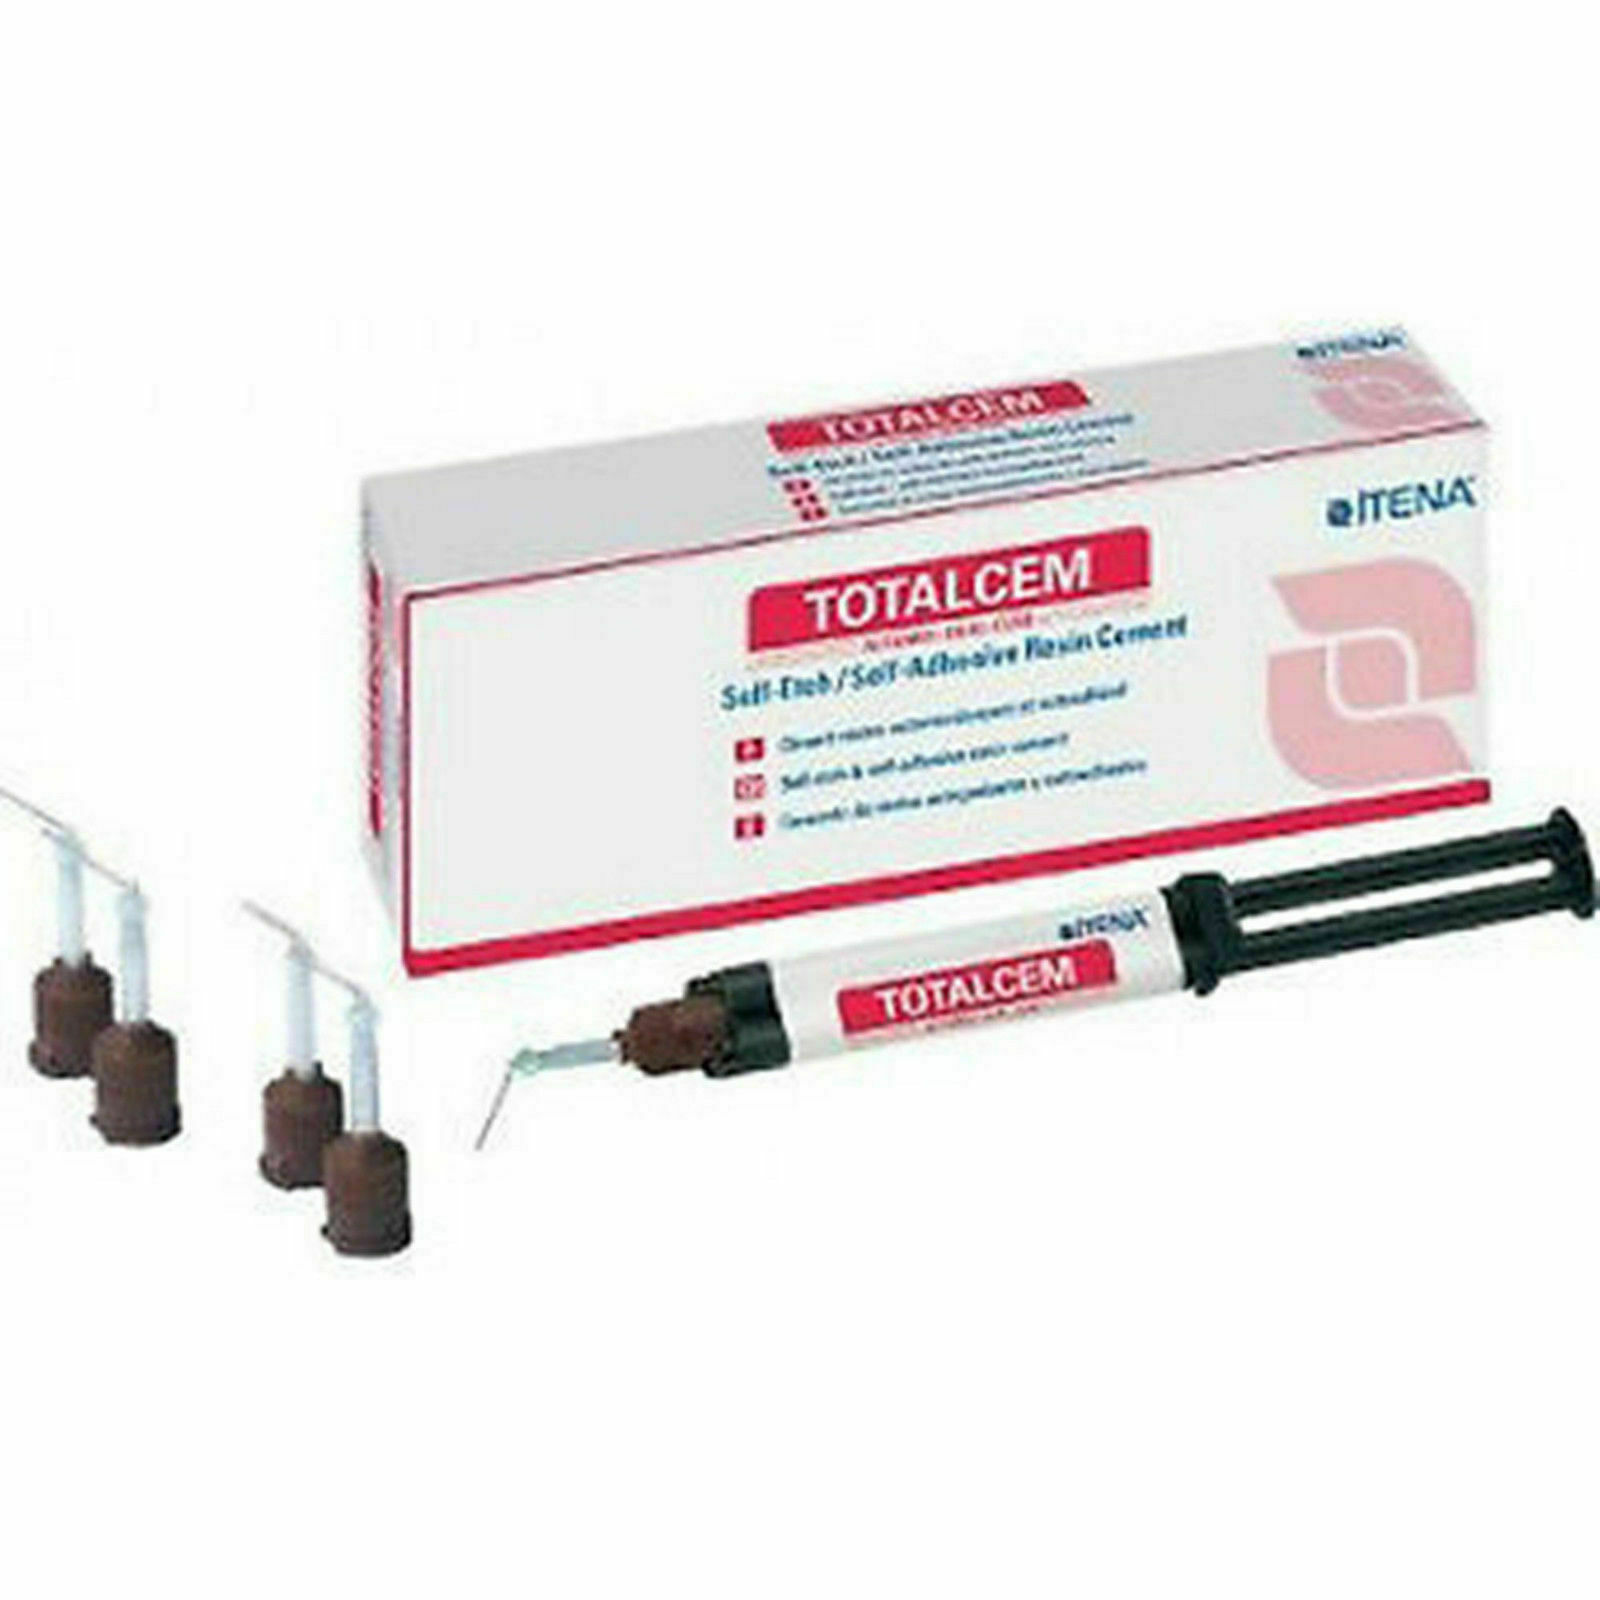 Total Cem by Itena 8 gm Self Etch, Self Adhesive Resin Cement FRESH STOCK